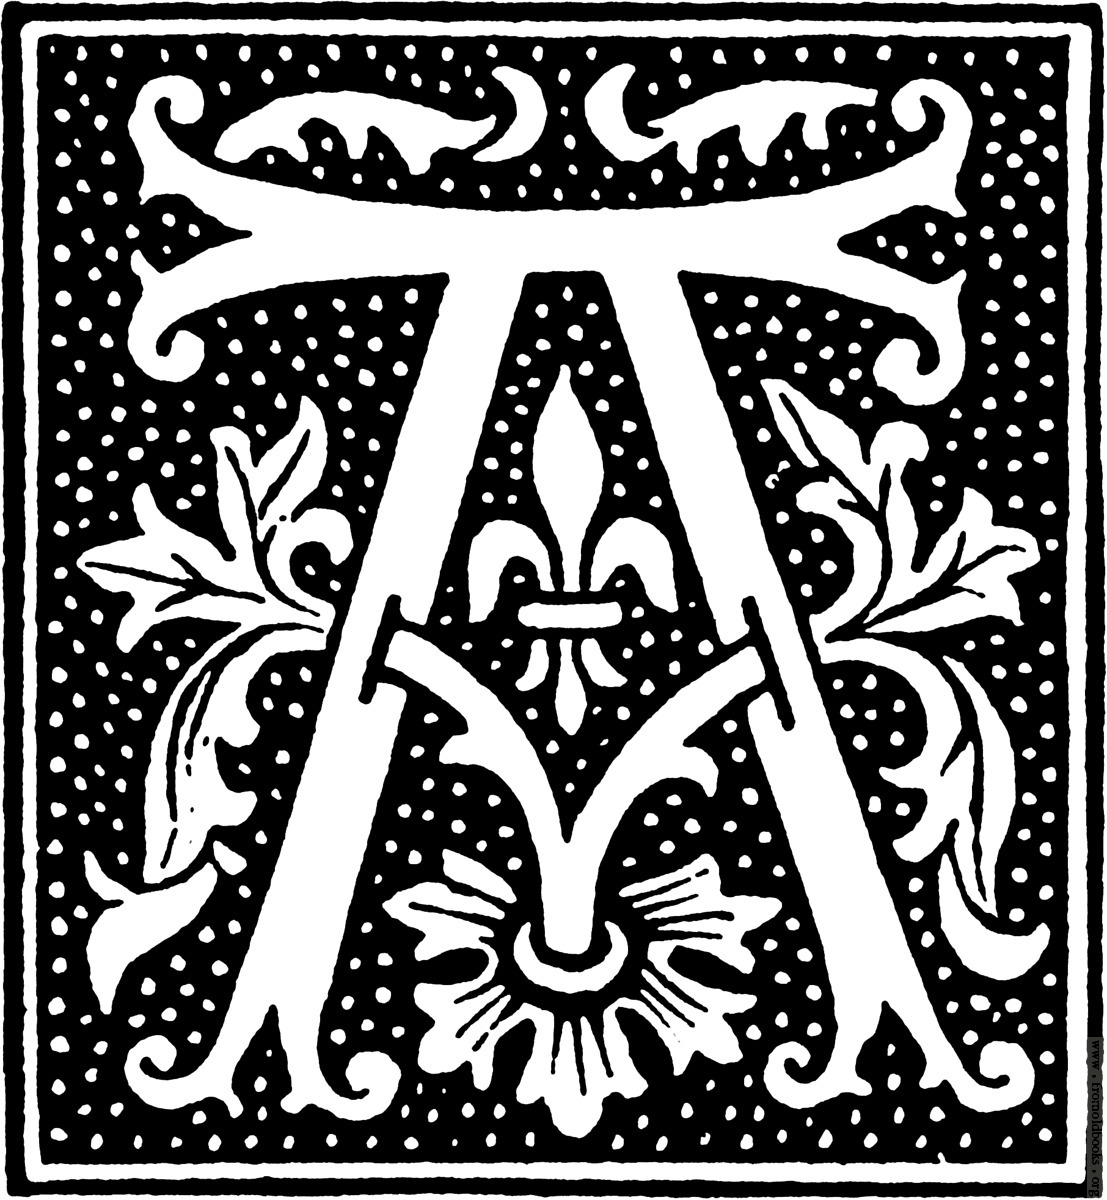 Clipart  Initial Letter A From Beginning Of The 16th Century   Details    